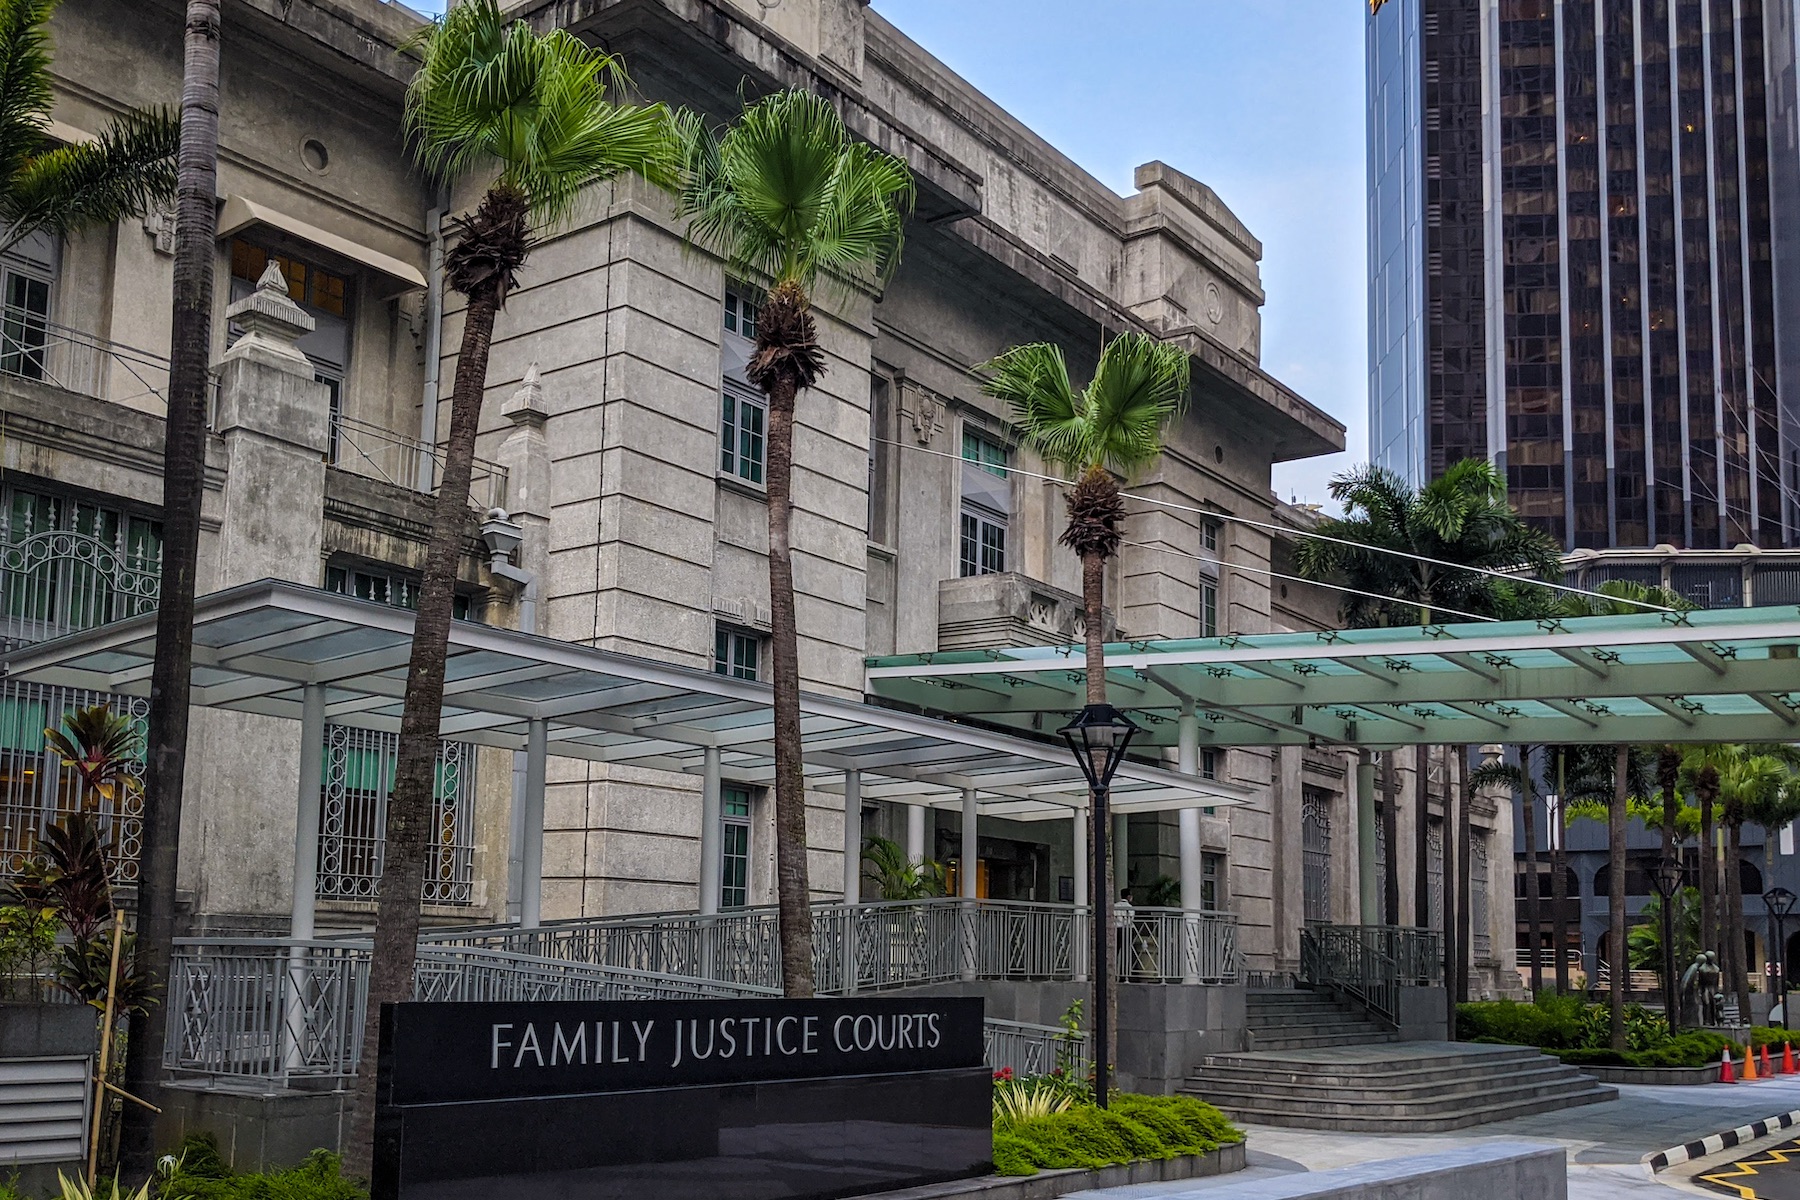 The main entrance to Singapore's Family Justice Courts is shown with a glass awning for approaching visitors and vehicles